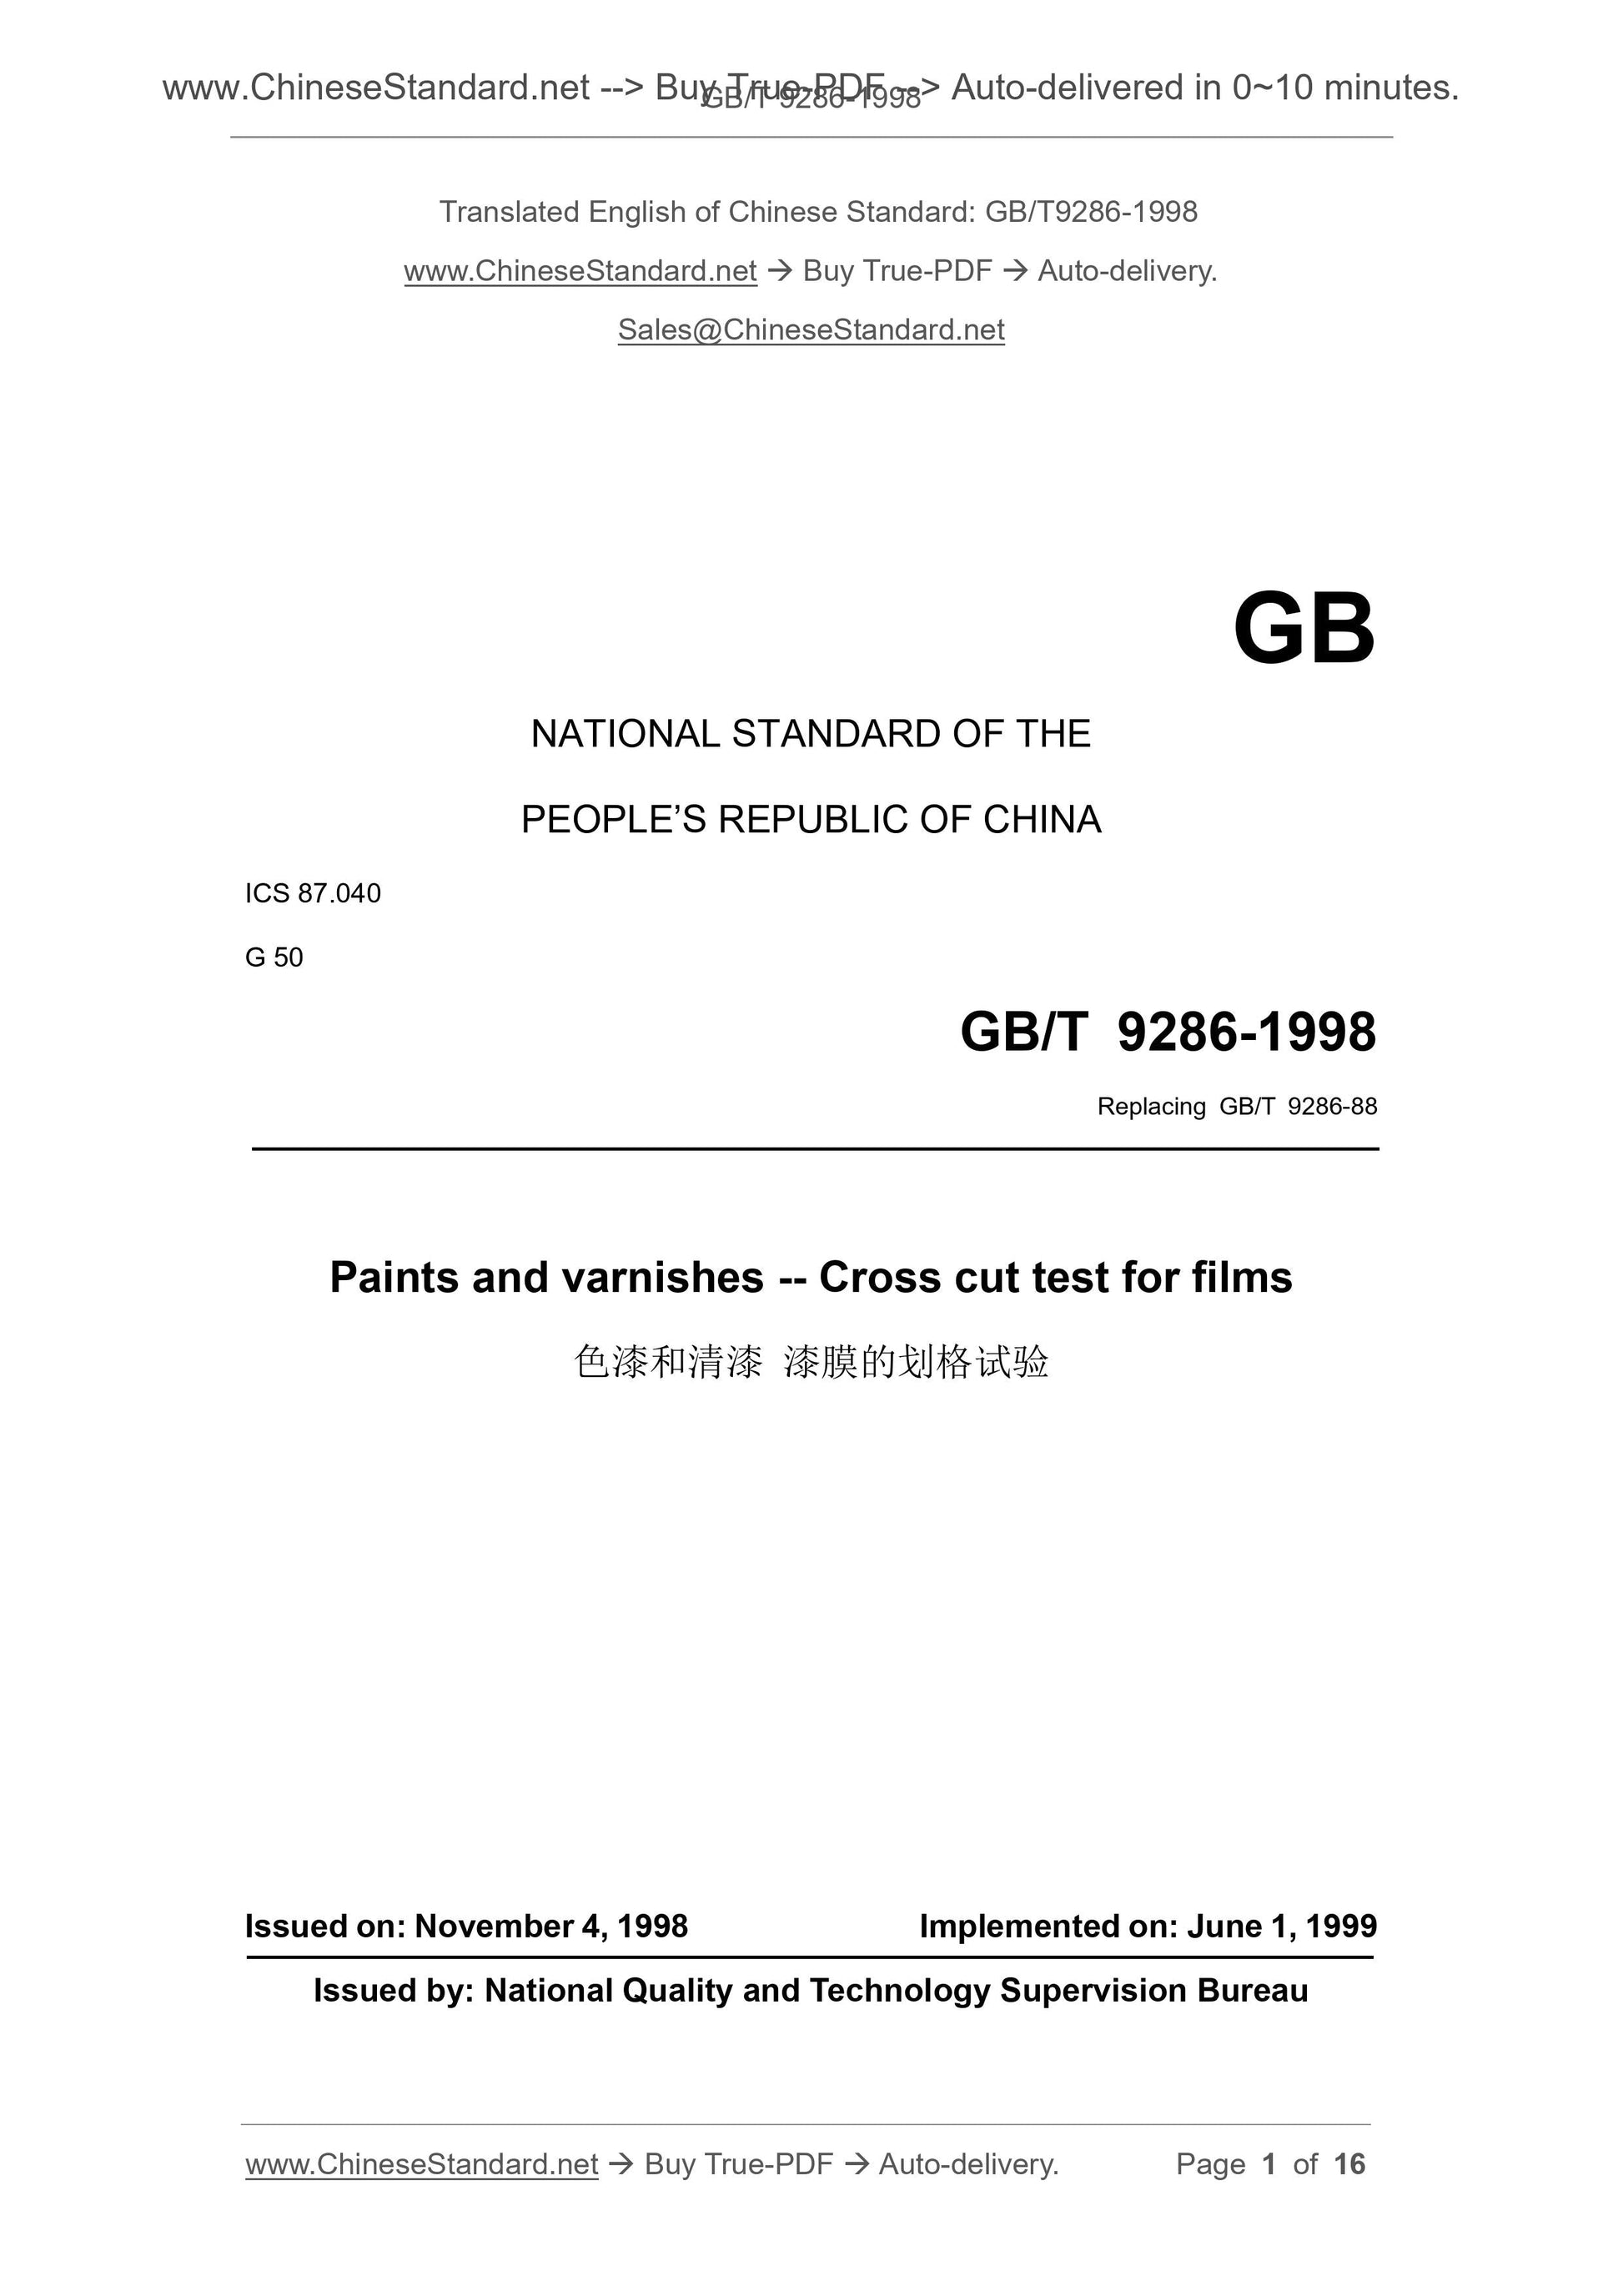 GB/T 9286-1998 Page 1